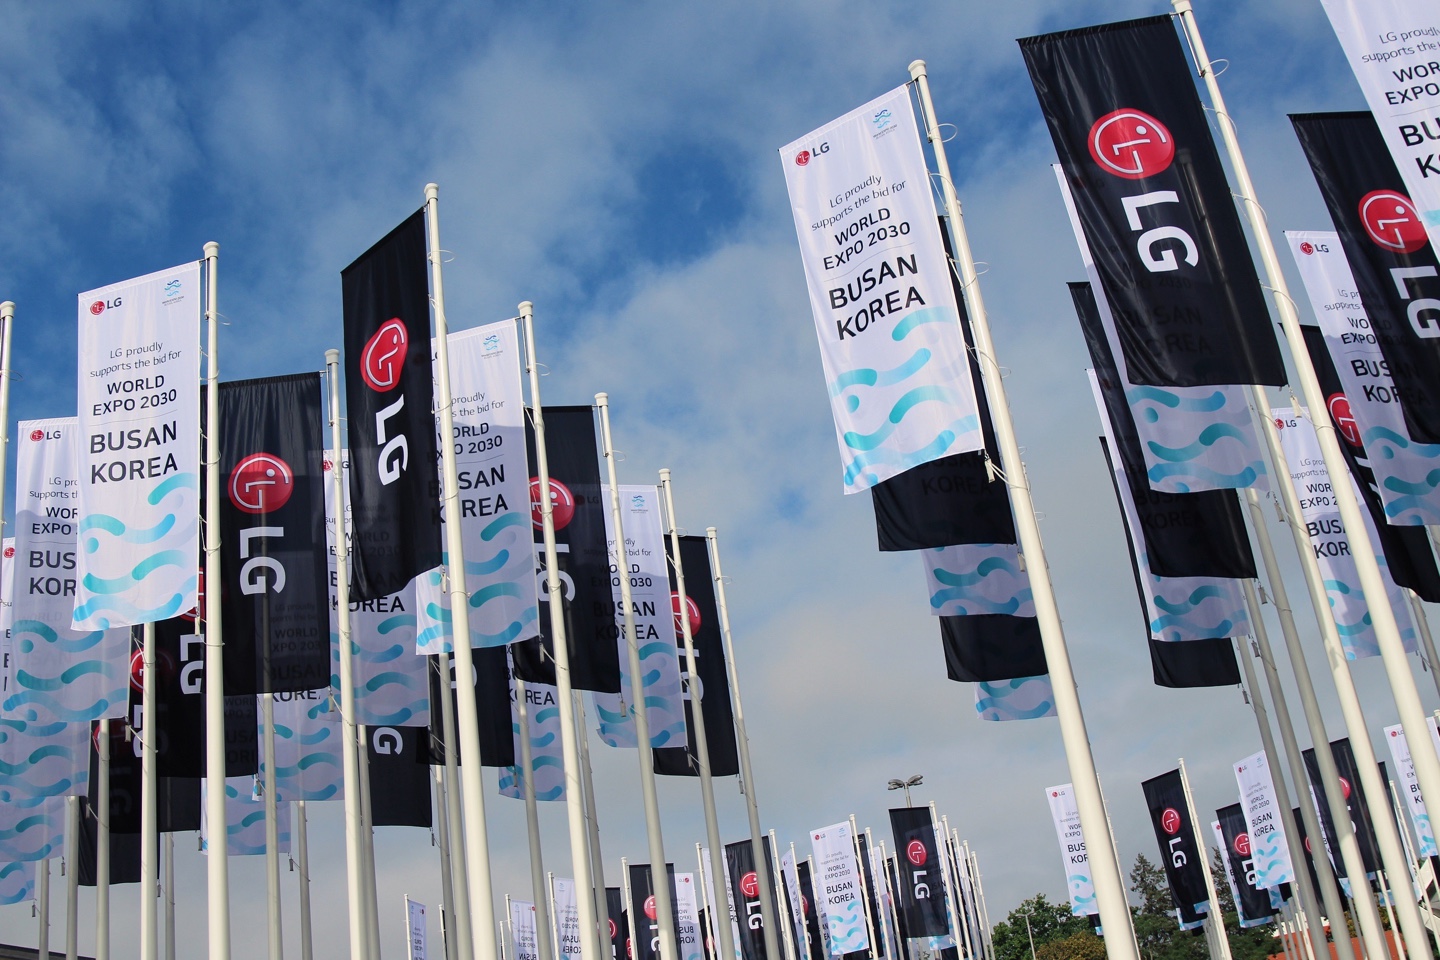 Promotional flags of LG logo and Busan's bid for World Expo 2030 flying in front of Messe Berlin during IFA 2022